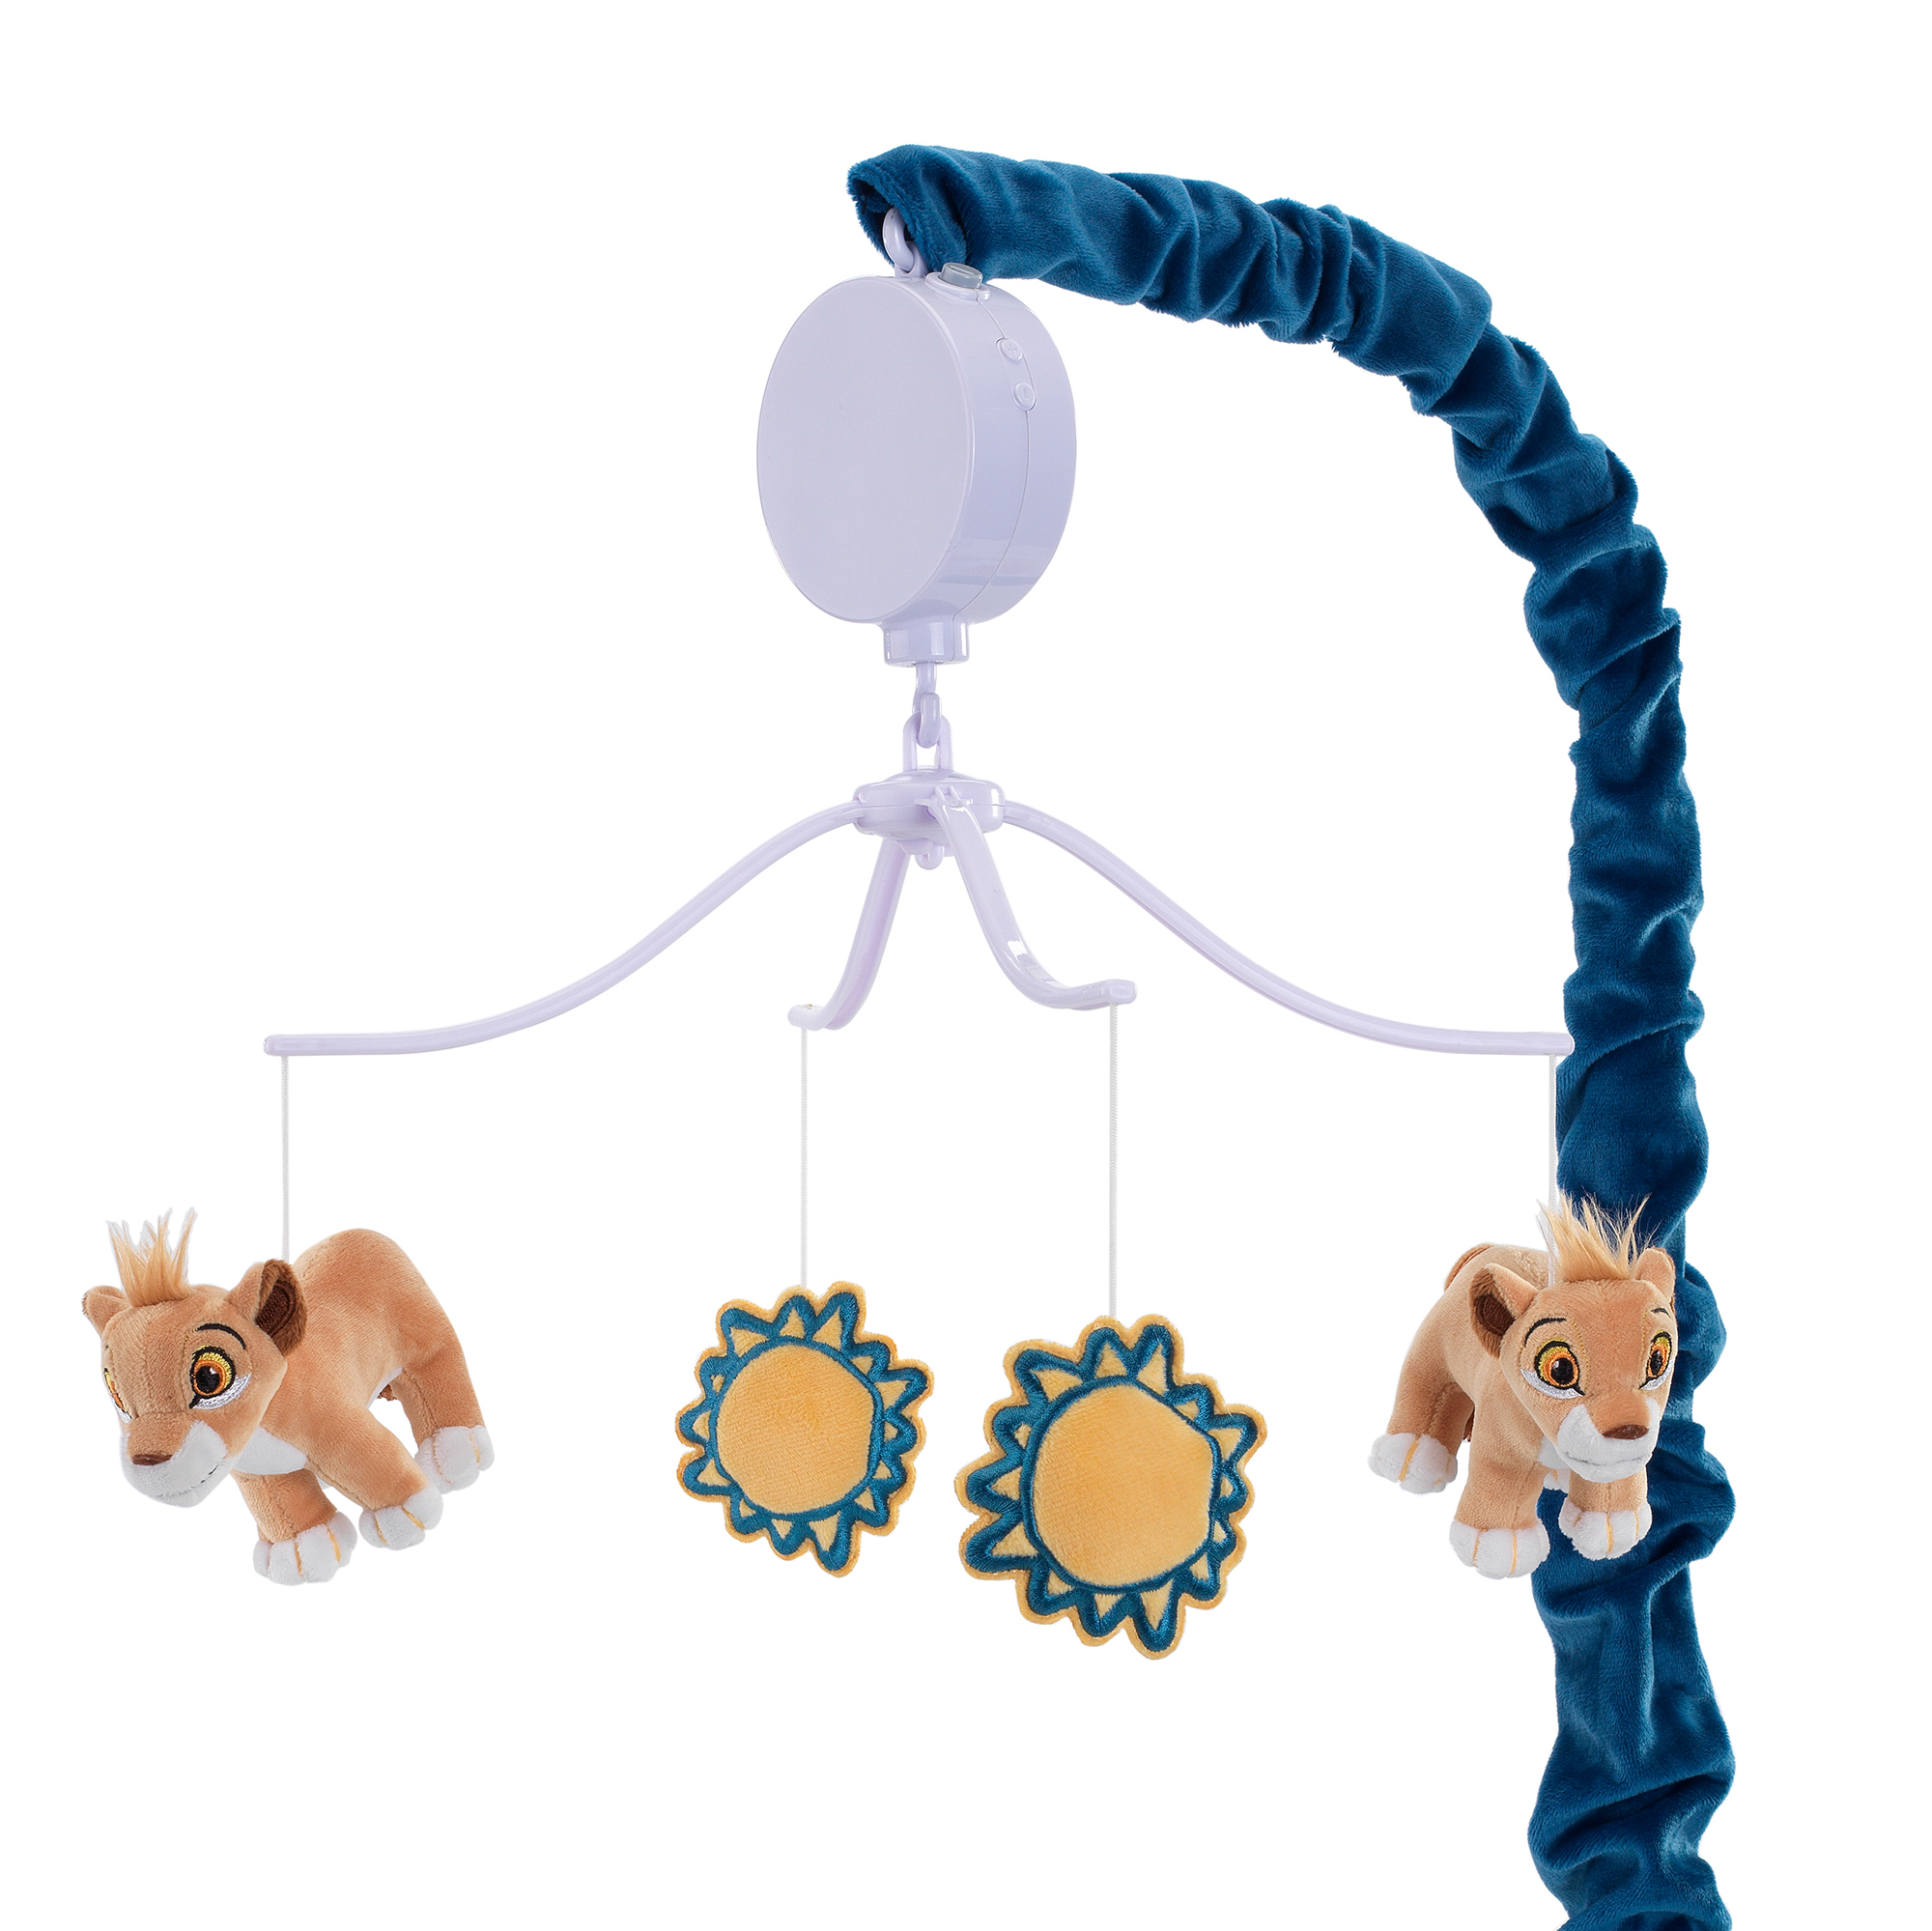 Disney Baby Lion King Adventure Musical Baby Crib Mobile by Lambs & Ivy - Blue - image 1 of 4